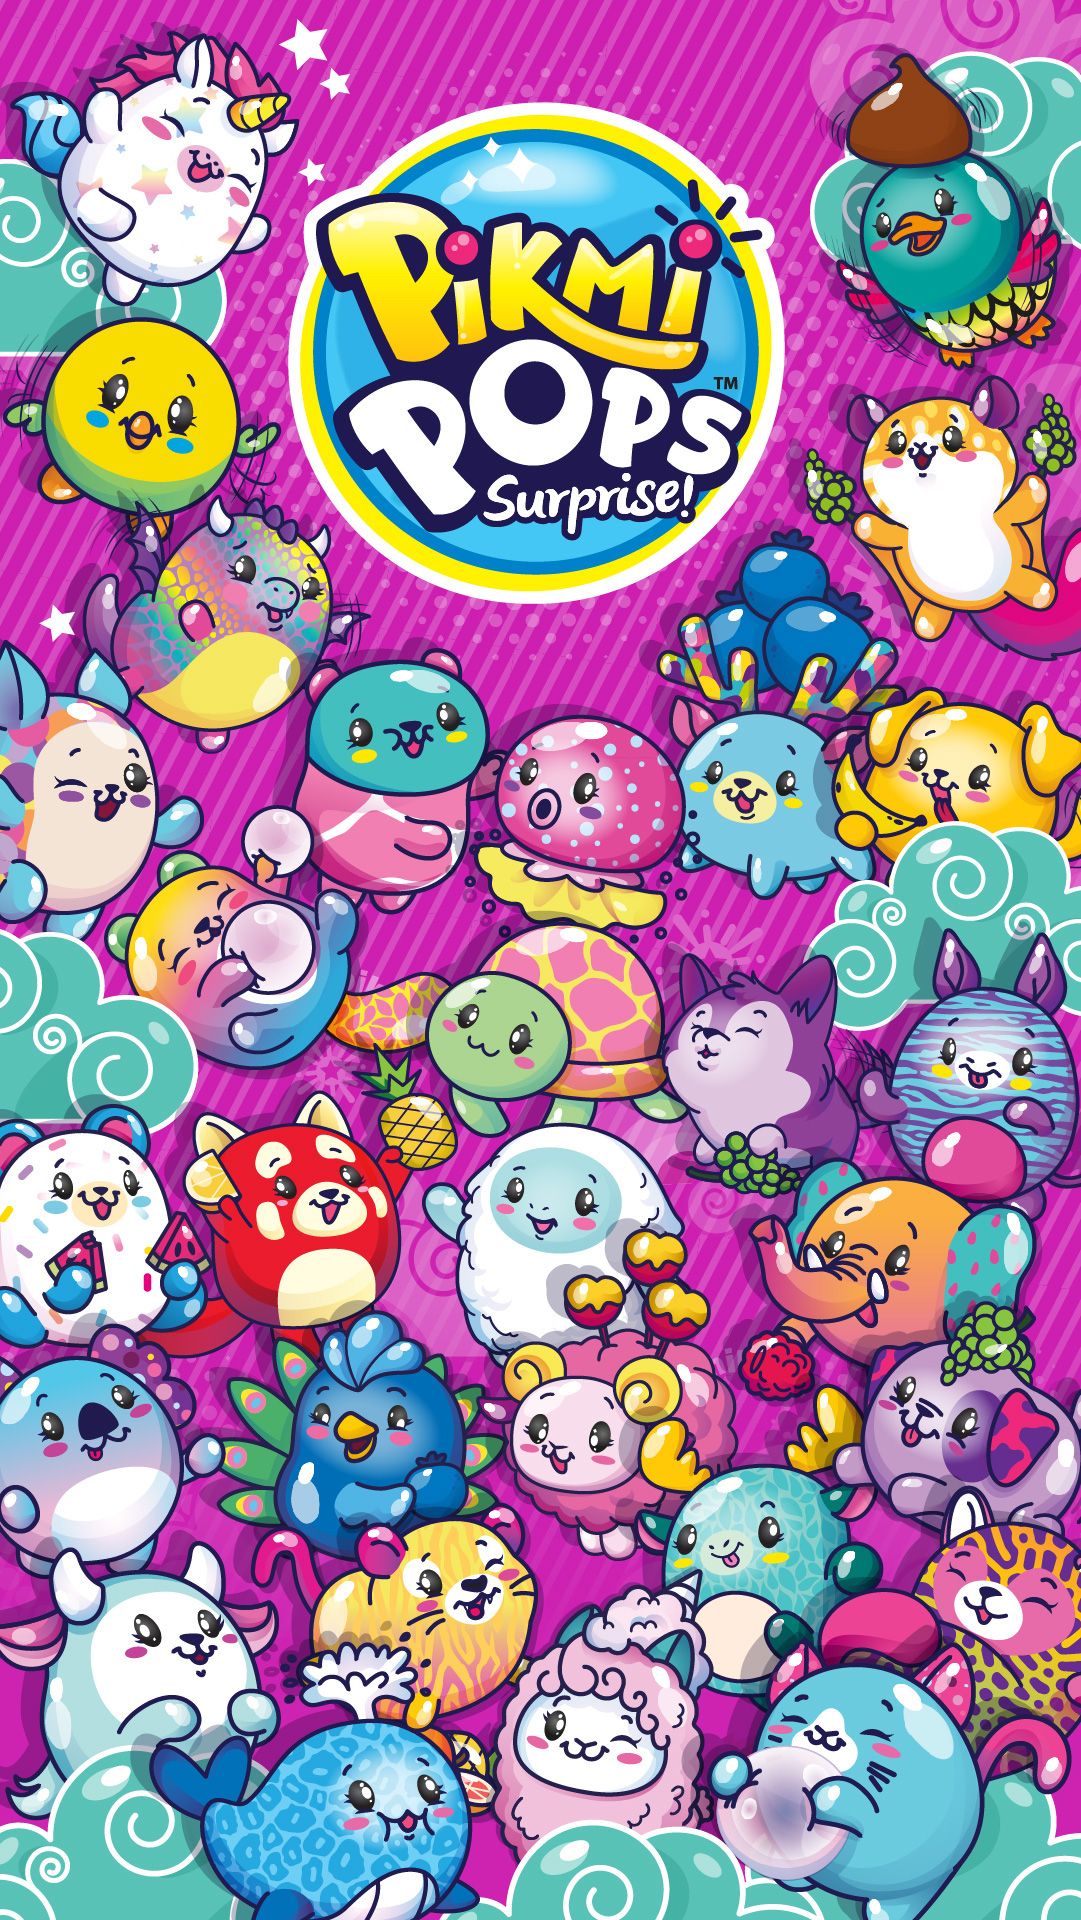 Pikmipops Wallpapers